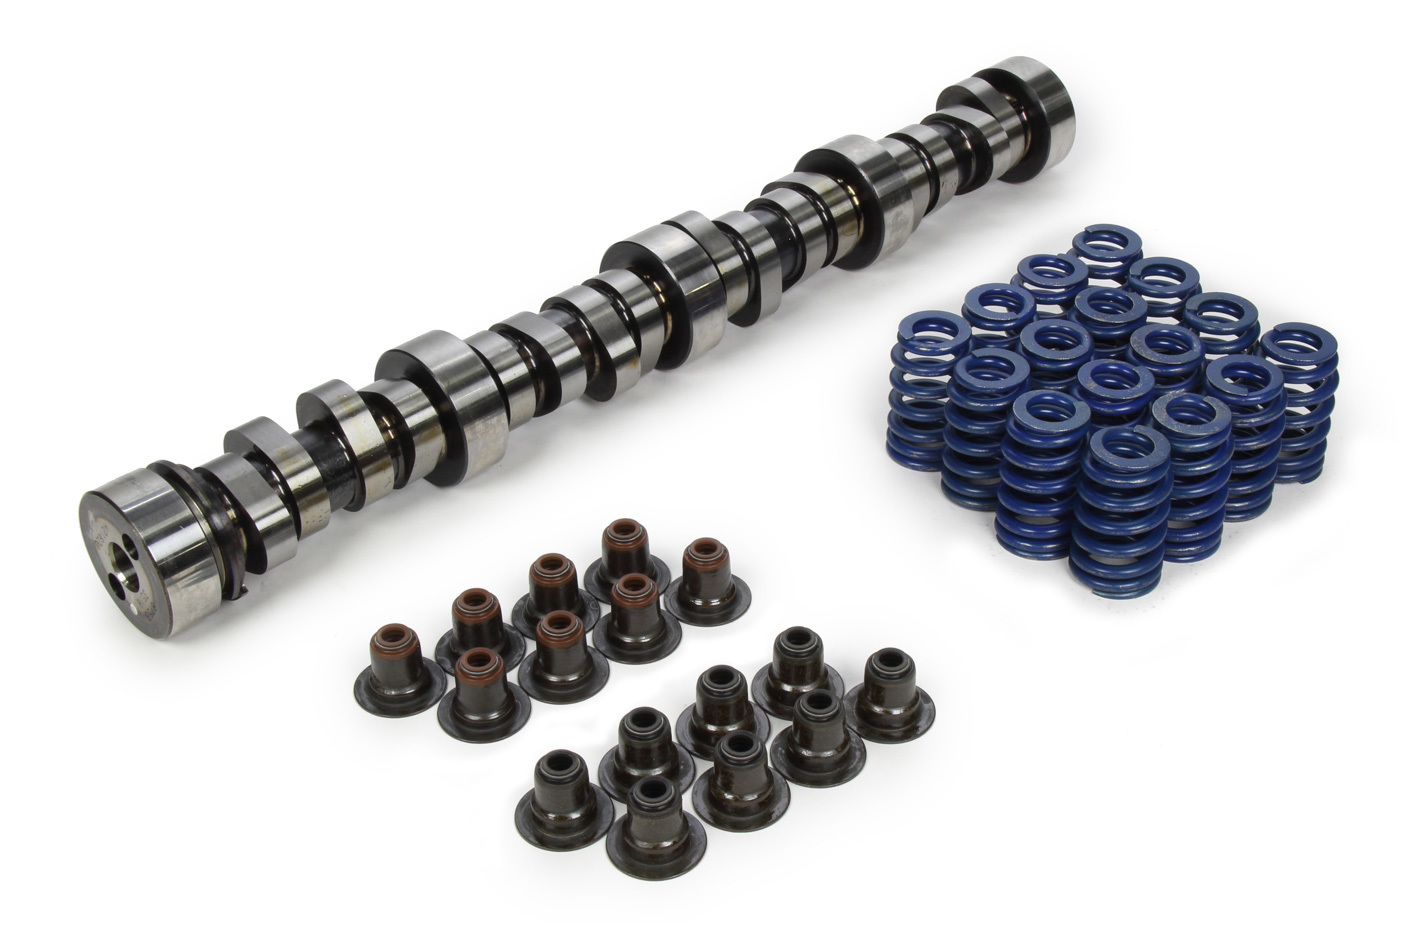 GM Performance, Camshaft/Springs,  LS1 Hot Camshaft,  Hydraulic Roller,  Lift 0.525/0.525 in,  Duration 219/228,  112 LSA,  00